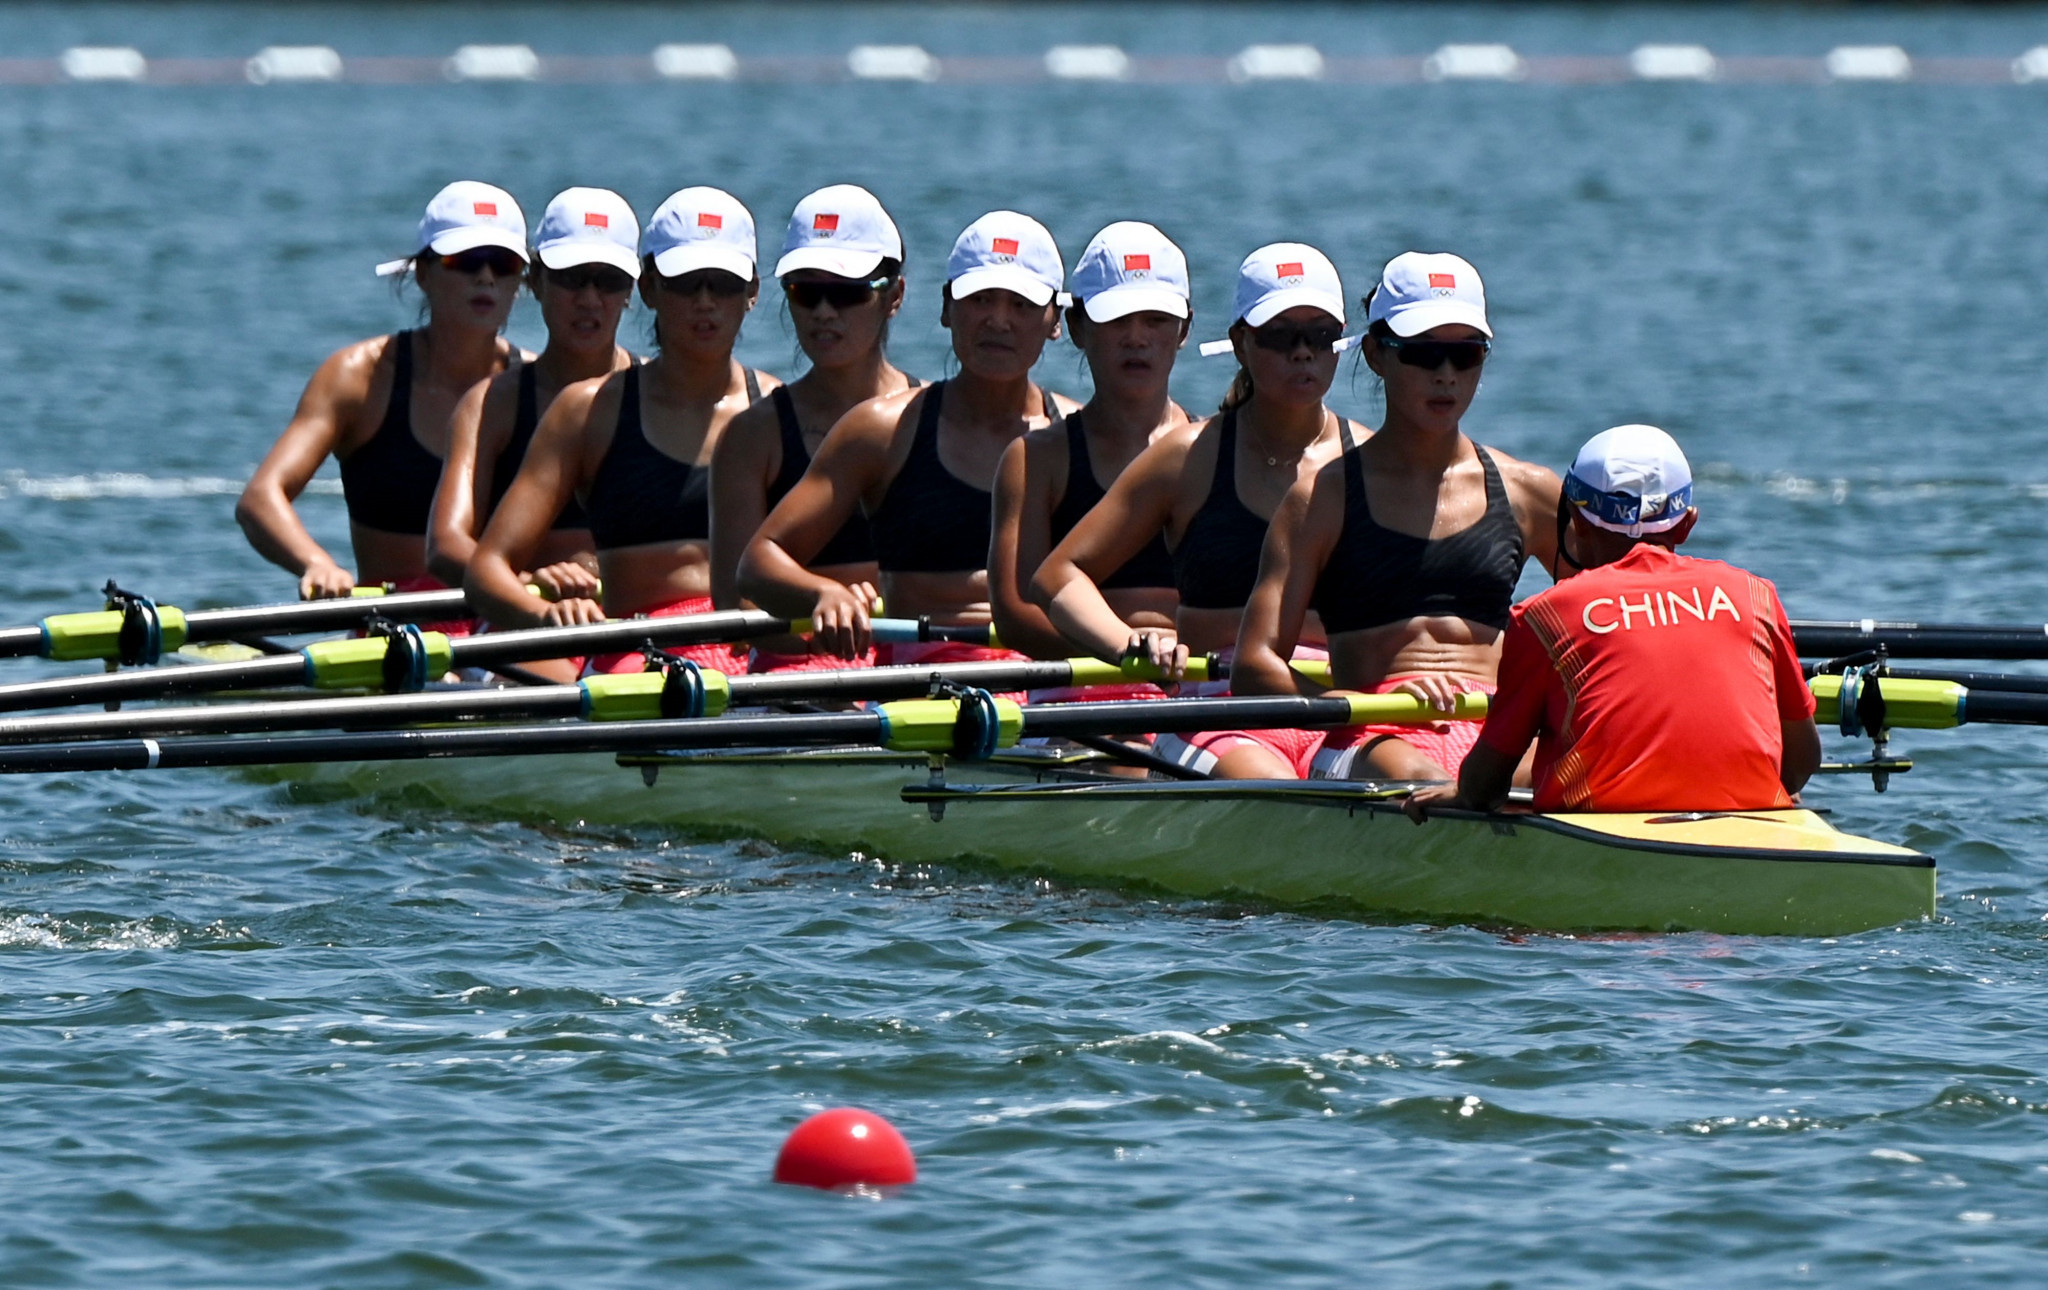 China is hoping to stage the World Rowing Championships for the first time with Shanghai in the running to host the 2025 edition ©Getty Images